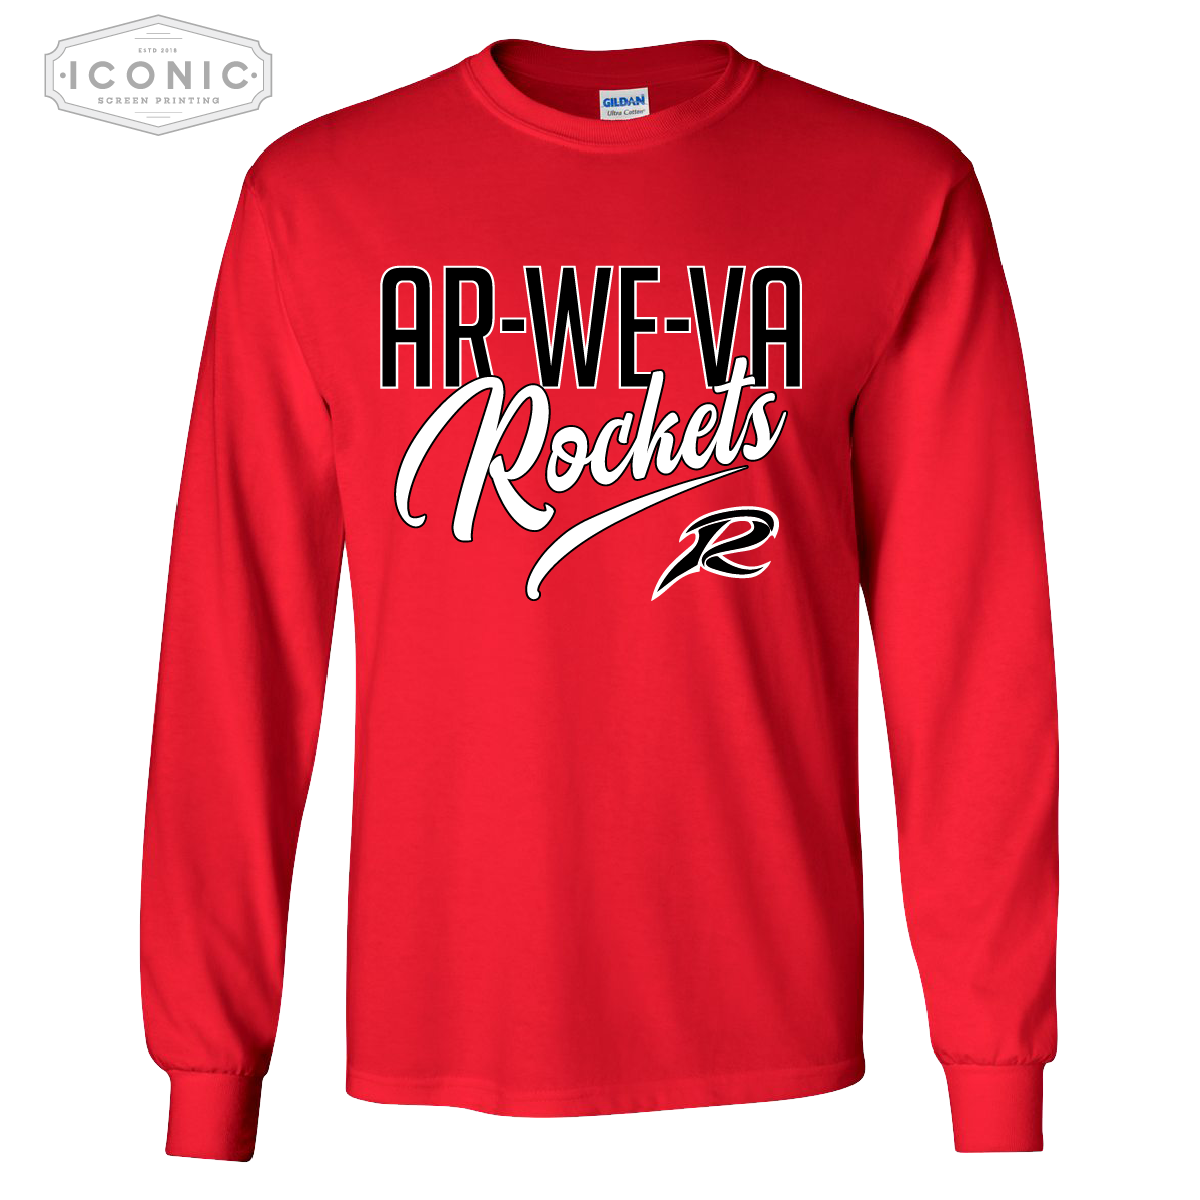 AWV Rockets - Ultra Cotton Long Sleeve - Clearance